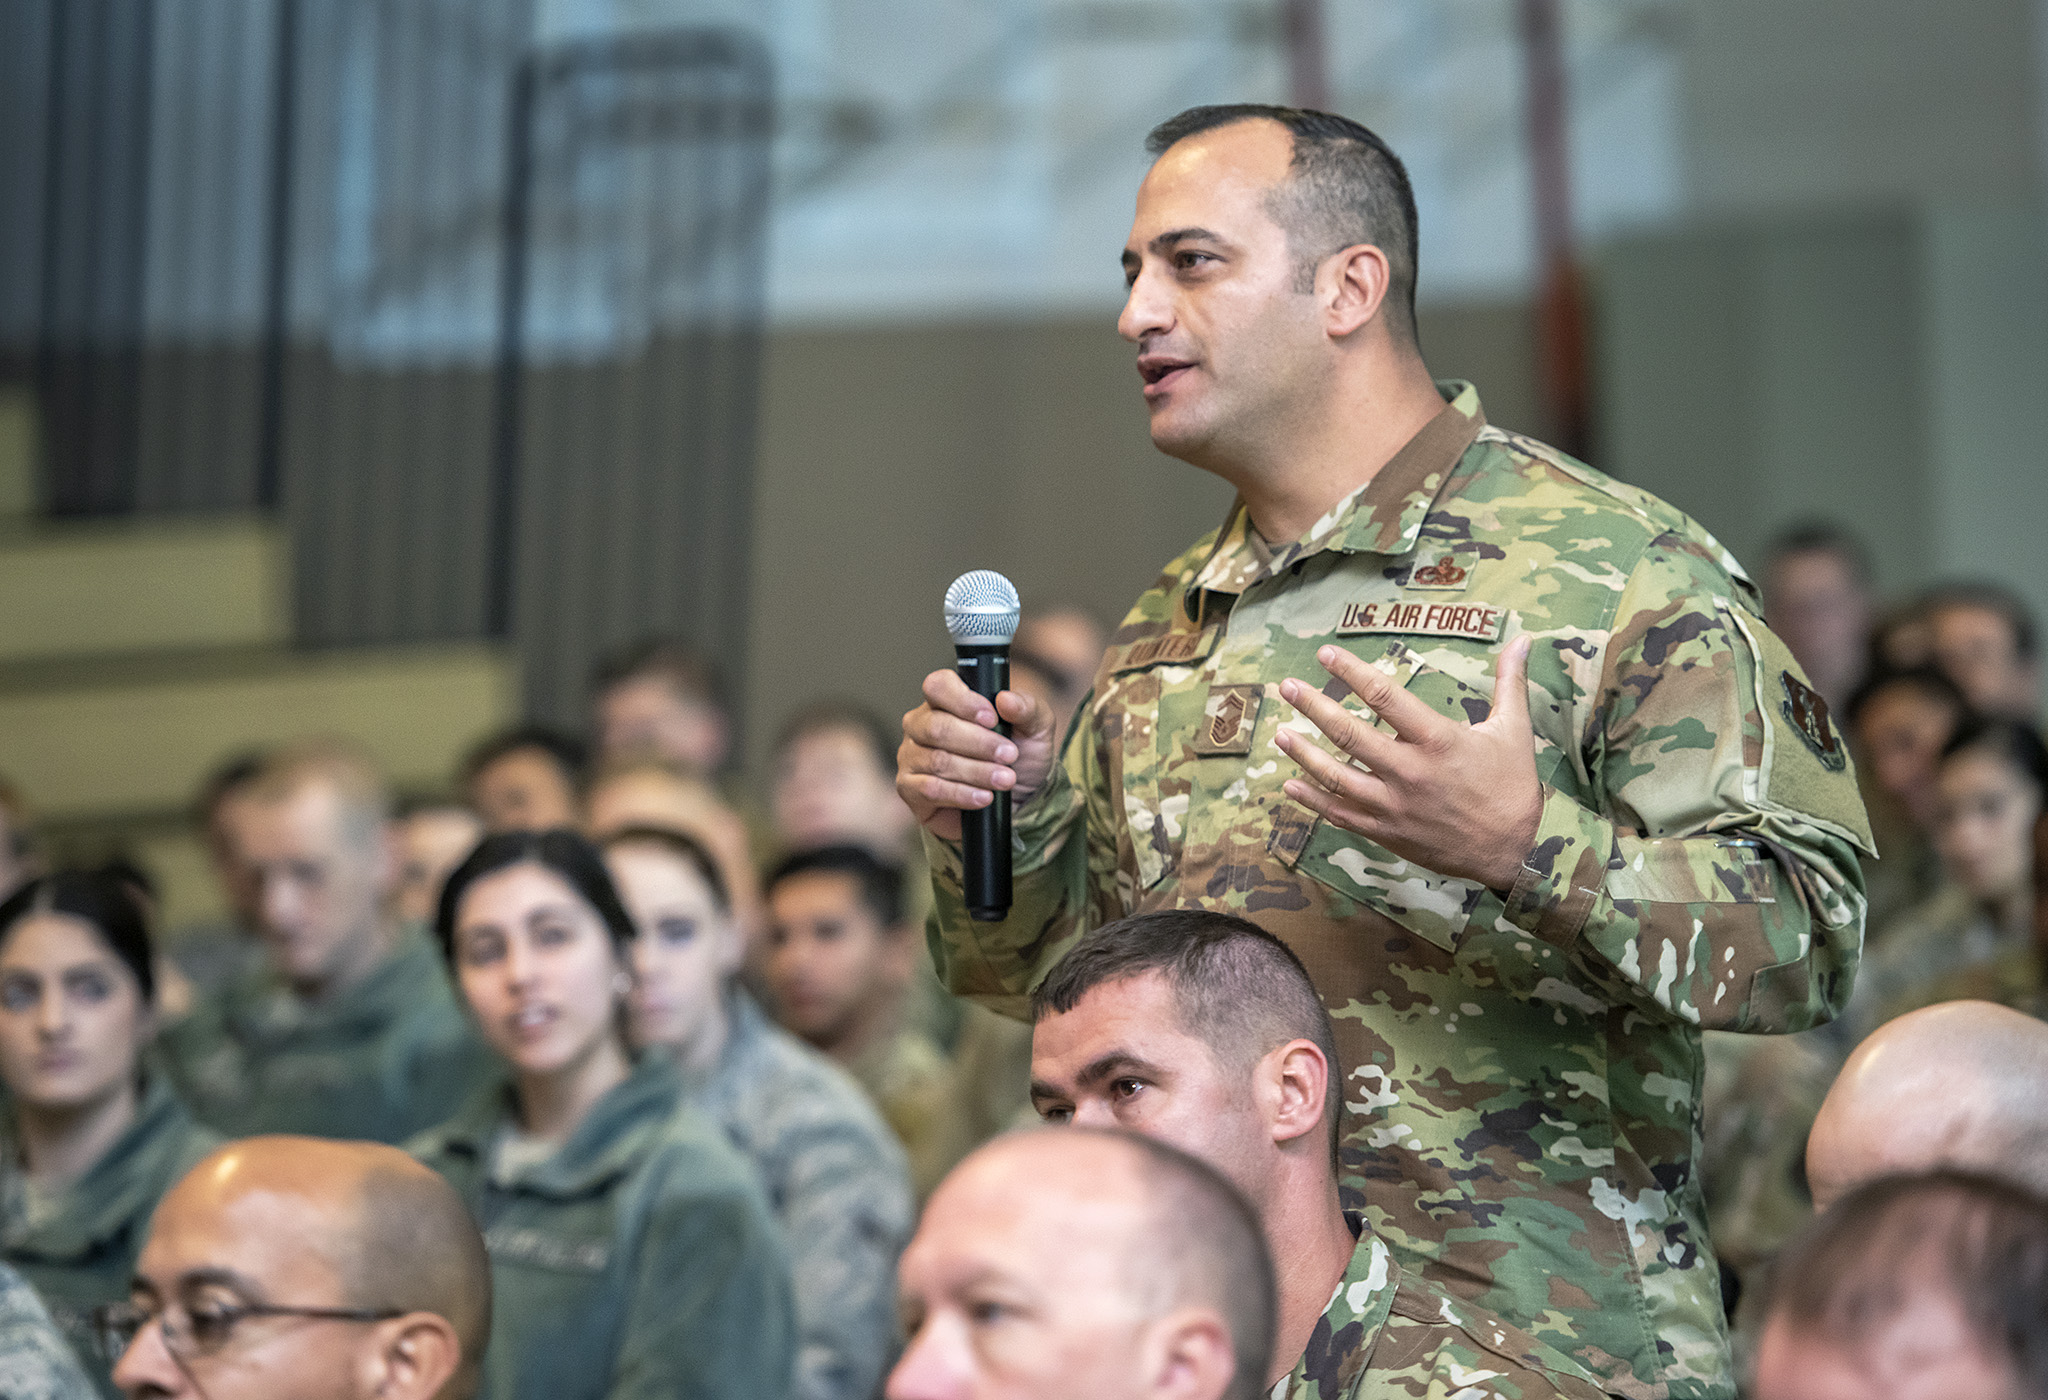 Senior Master Sgt. David Quintero, 159th Maintenance Group, Louisiana Air National Guard, asks a question about the future of the F-15 program to U.S. Air Force Lt. Gen. L. Scott Rice, director of the Air National Guard, during an “All Call” assembly at Naval Air Station Joint Reserve Base New Orleans, Nov. 3, 2019. Rice met with Wing leadership and visited Airmen throughout the unit to learn about their mission and to answer questions that Airmen had for Air National Guard leadership. (U.S. Air National Guard photo by Senior Master Sgt. Dan Farrell)